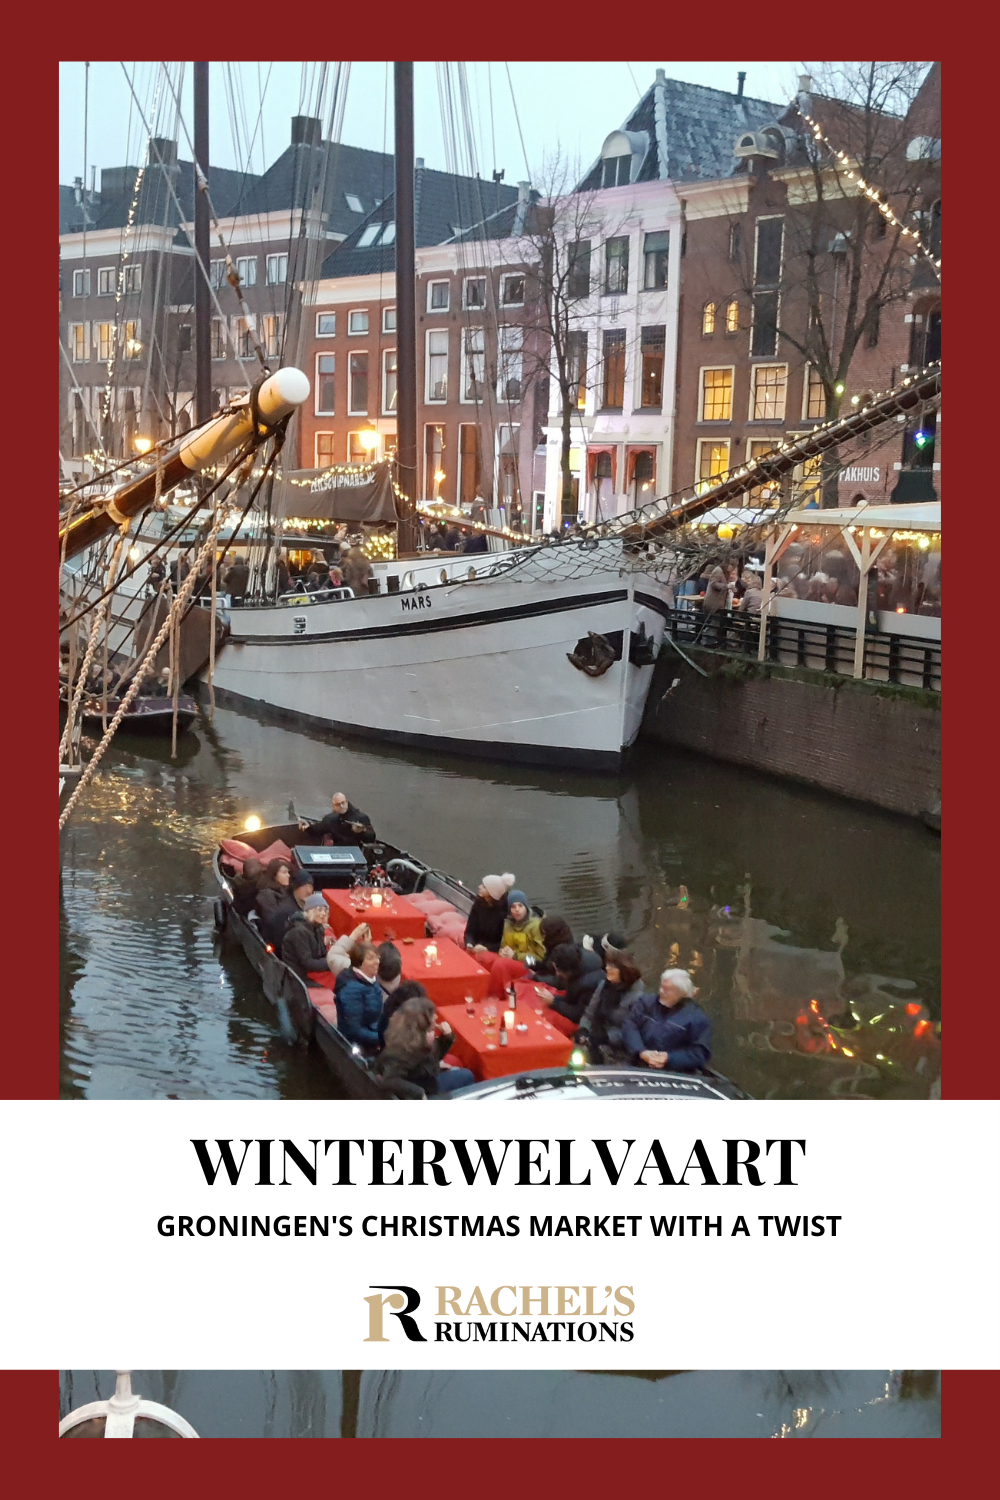 WinterWelVaart is Groningen's annual Christmas market, with an unusual maritime twist that makes it extra special! via @rachelsruminations